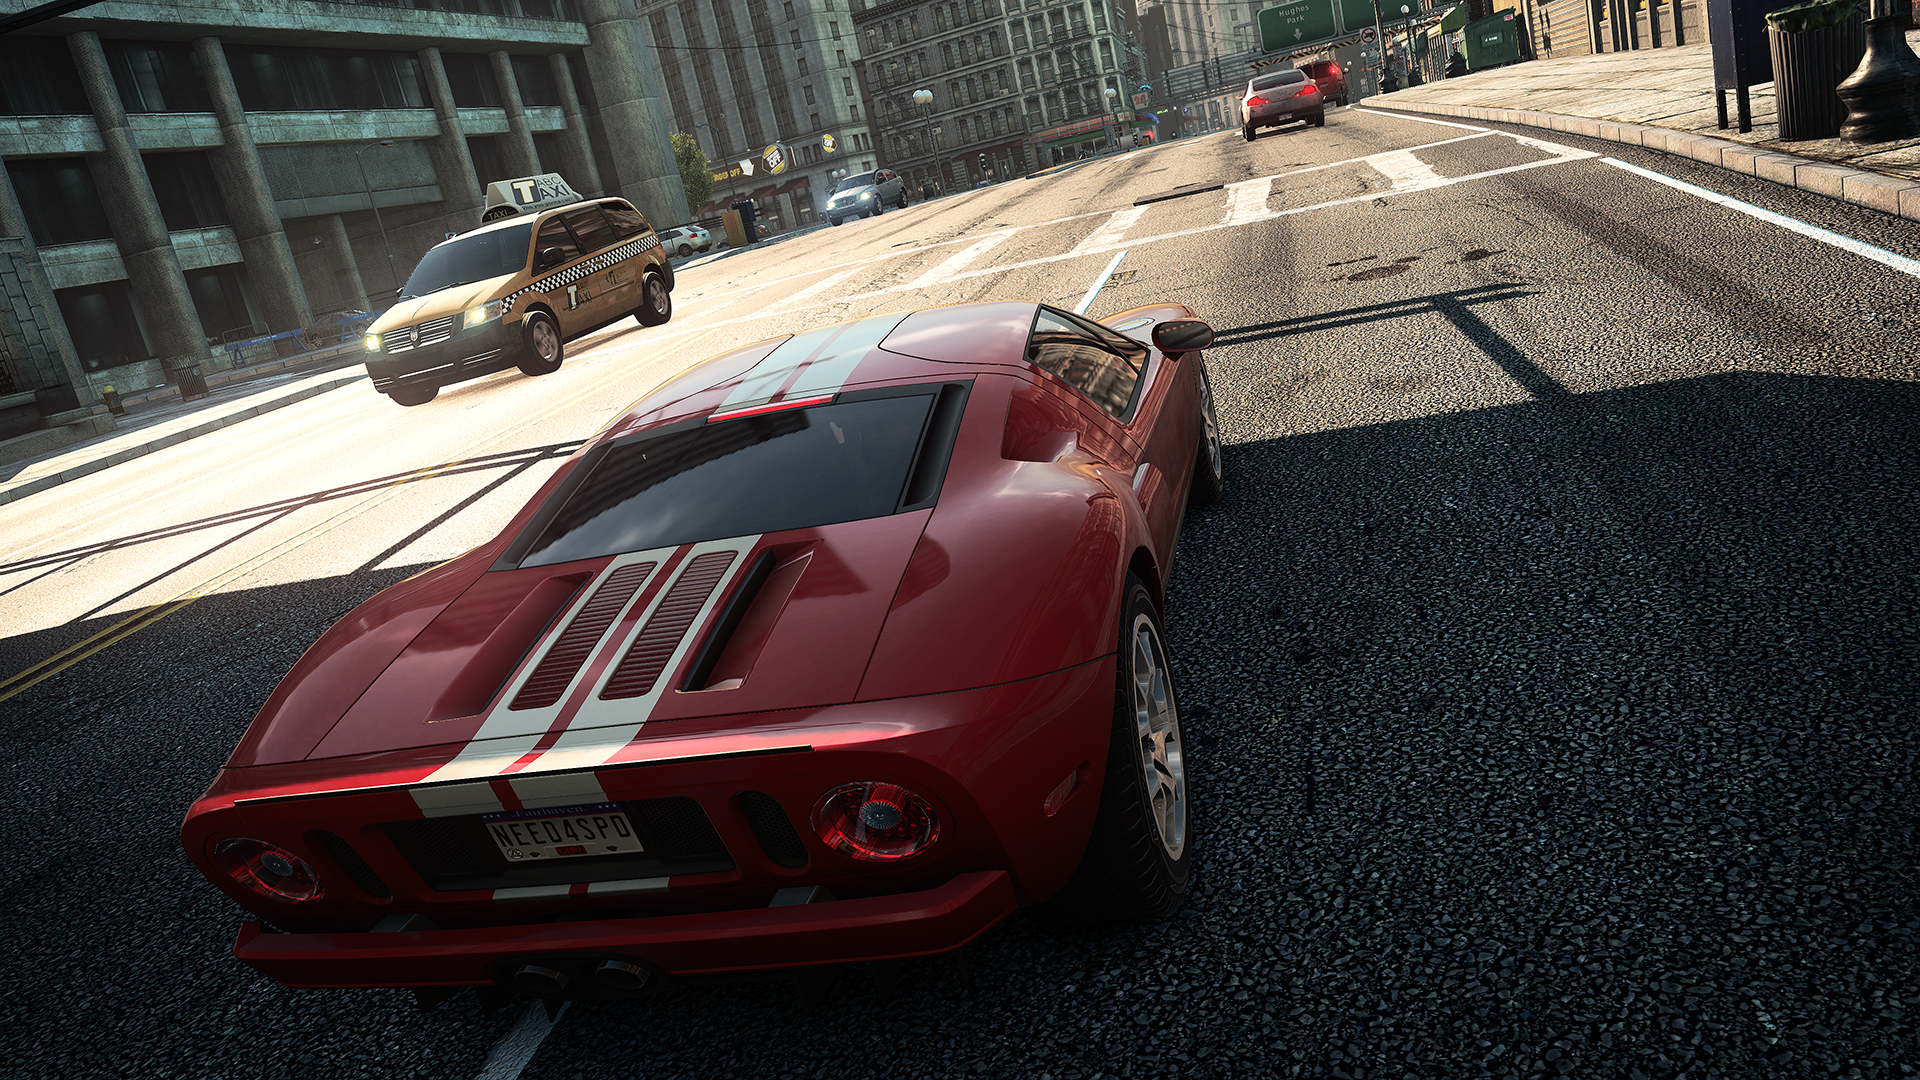 Video Game Need For Speed: Most Wanted HD Wallpaper | Background Image